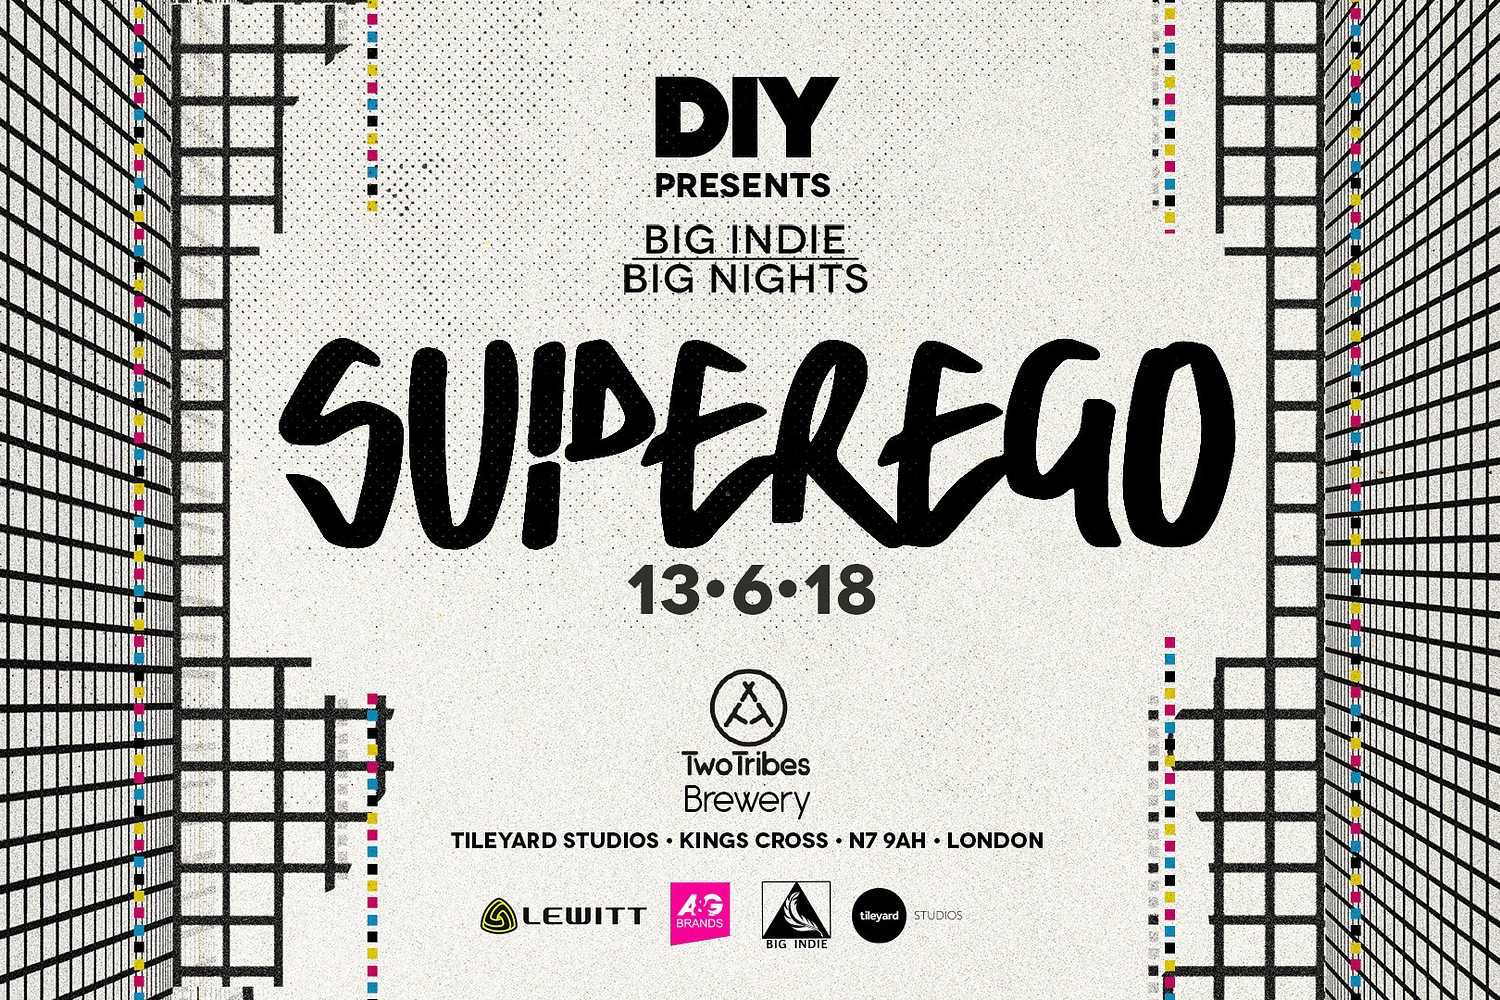 Grab your tickets for the next Big Indie Big Nights event with Superego now!